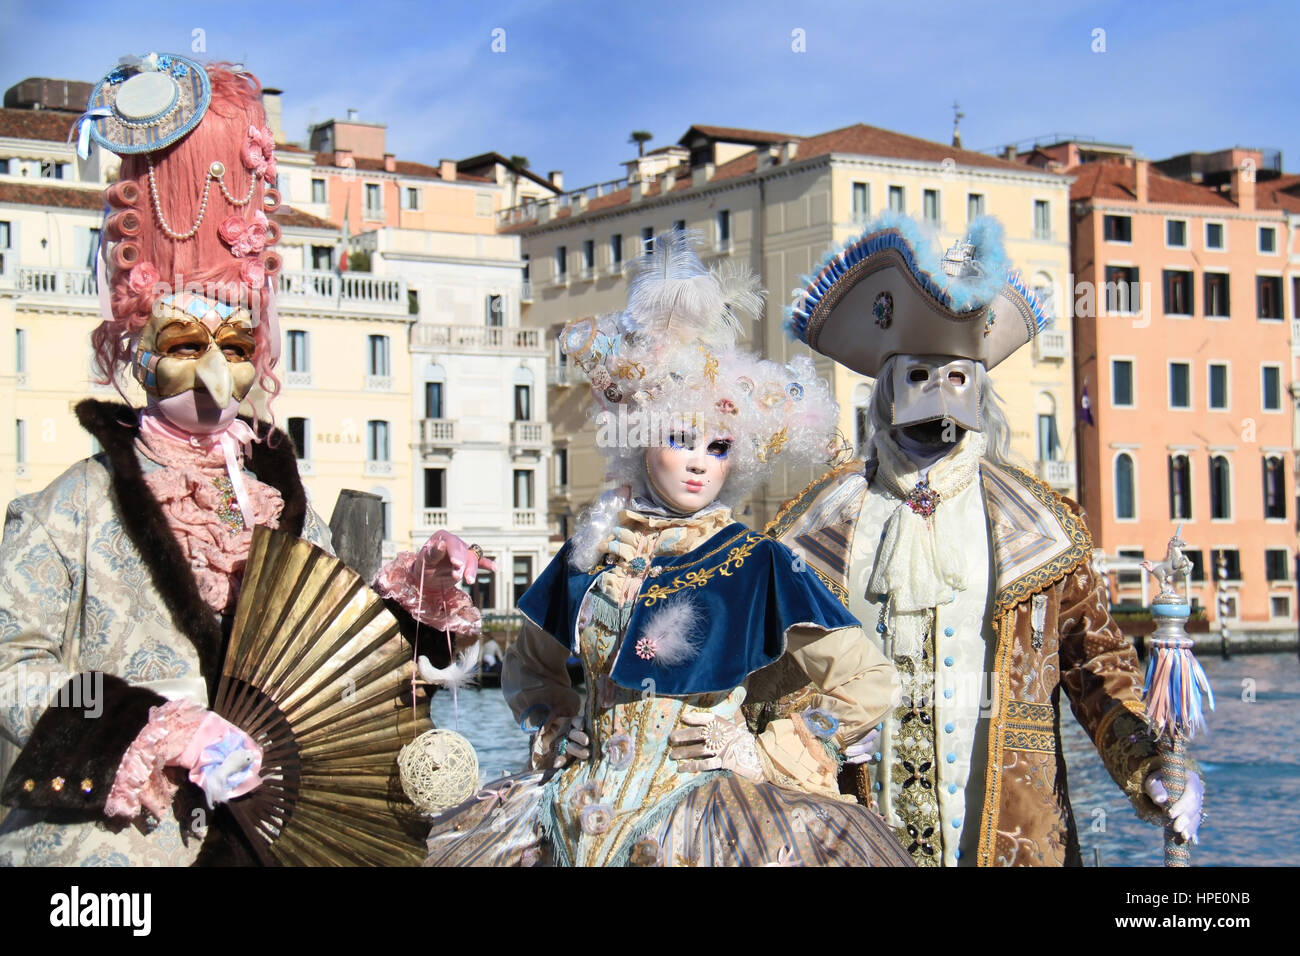 Venice carnival costume and mask. Stock Photo